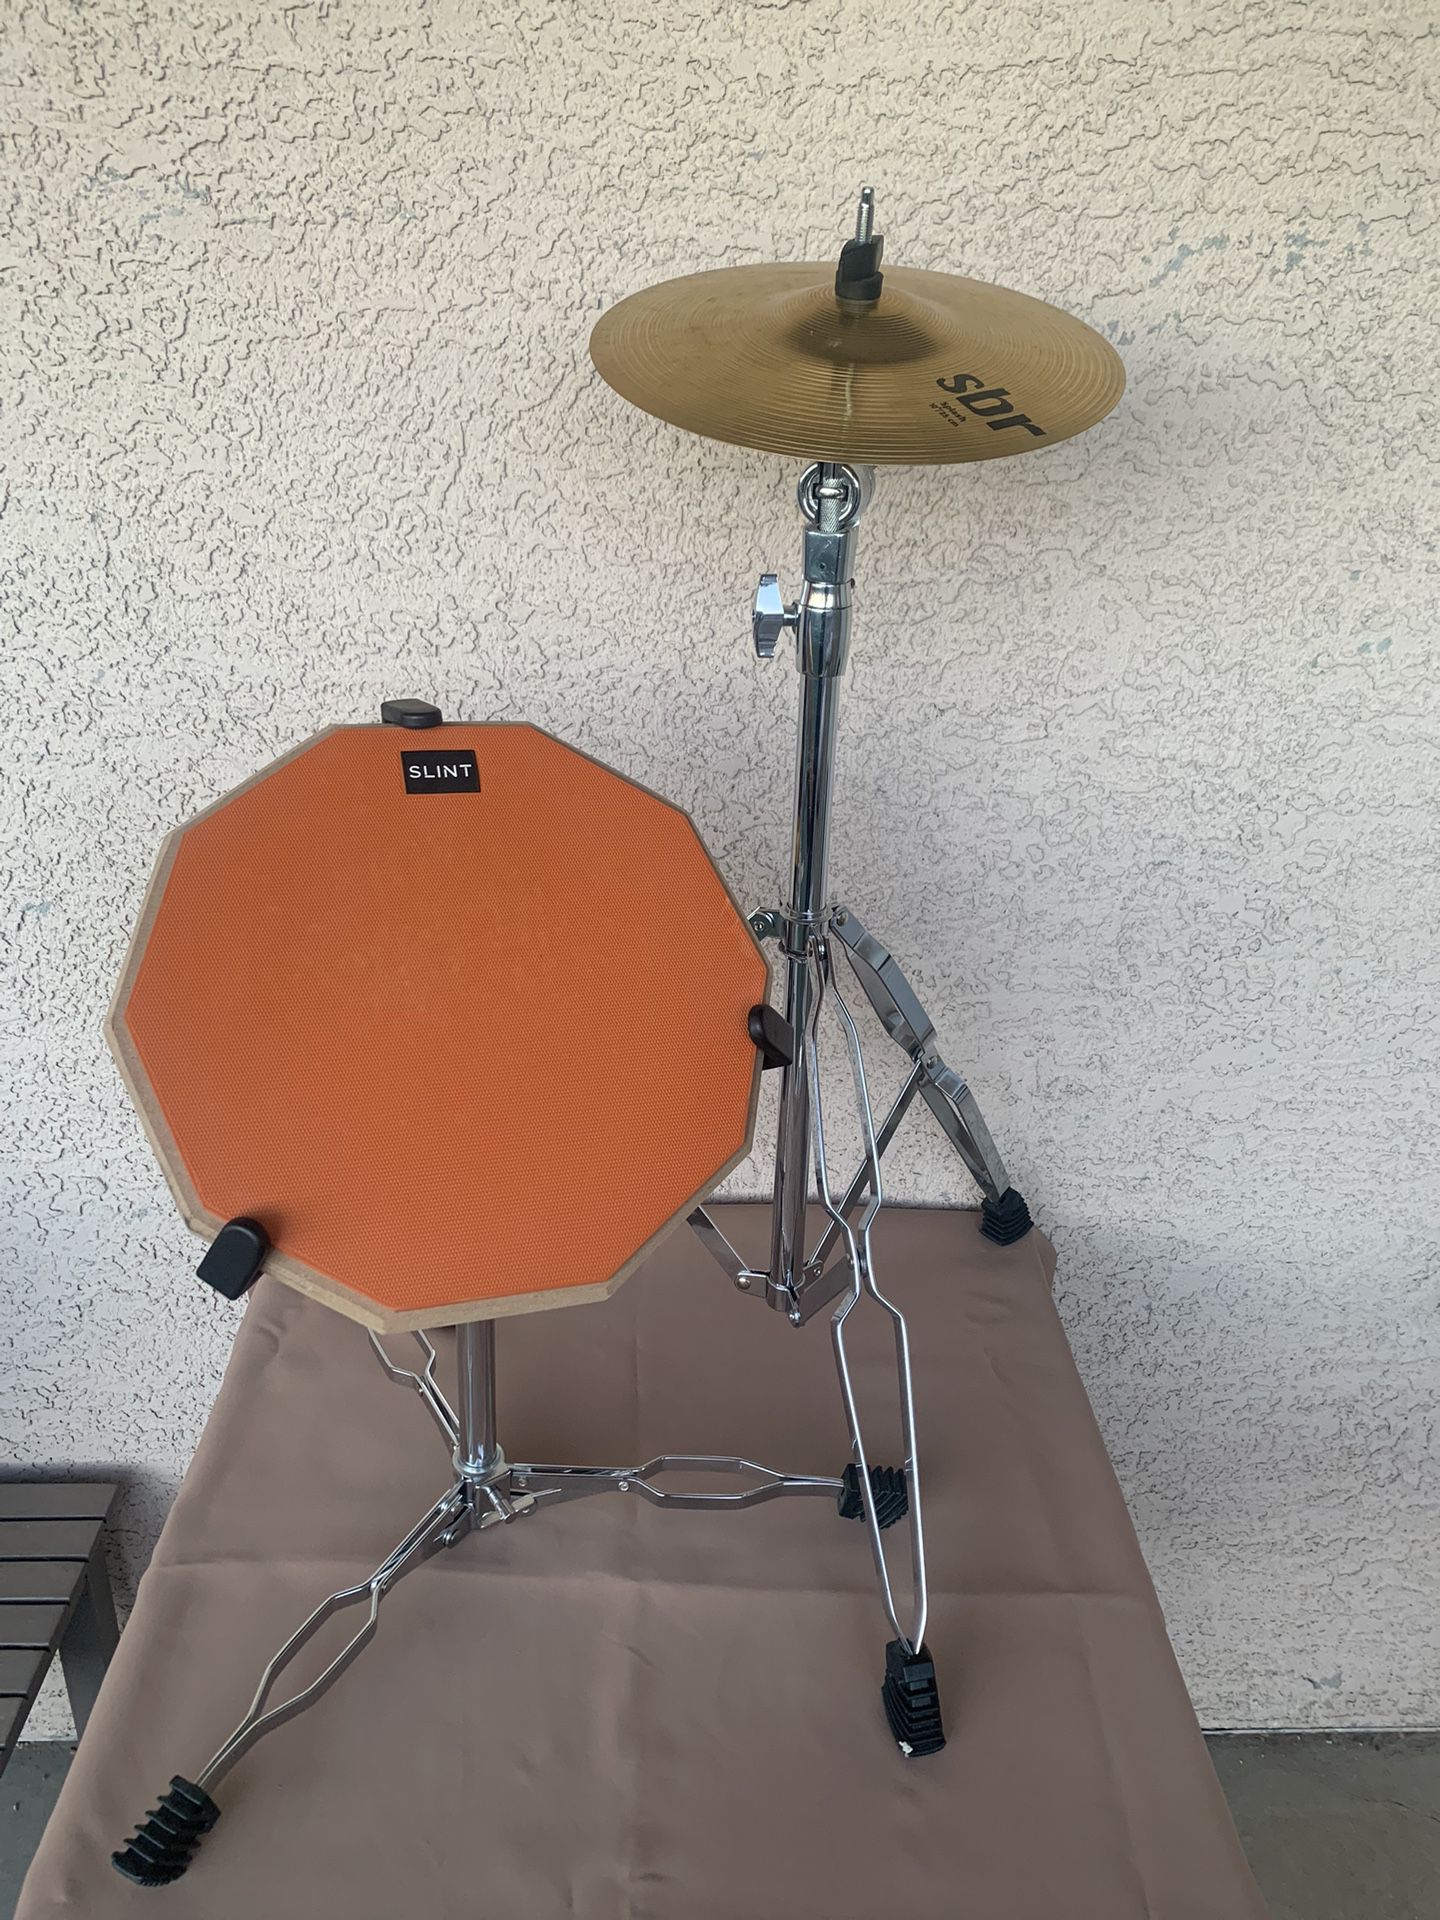 SBR Cymbal with stand